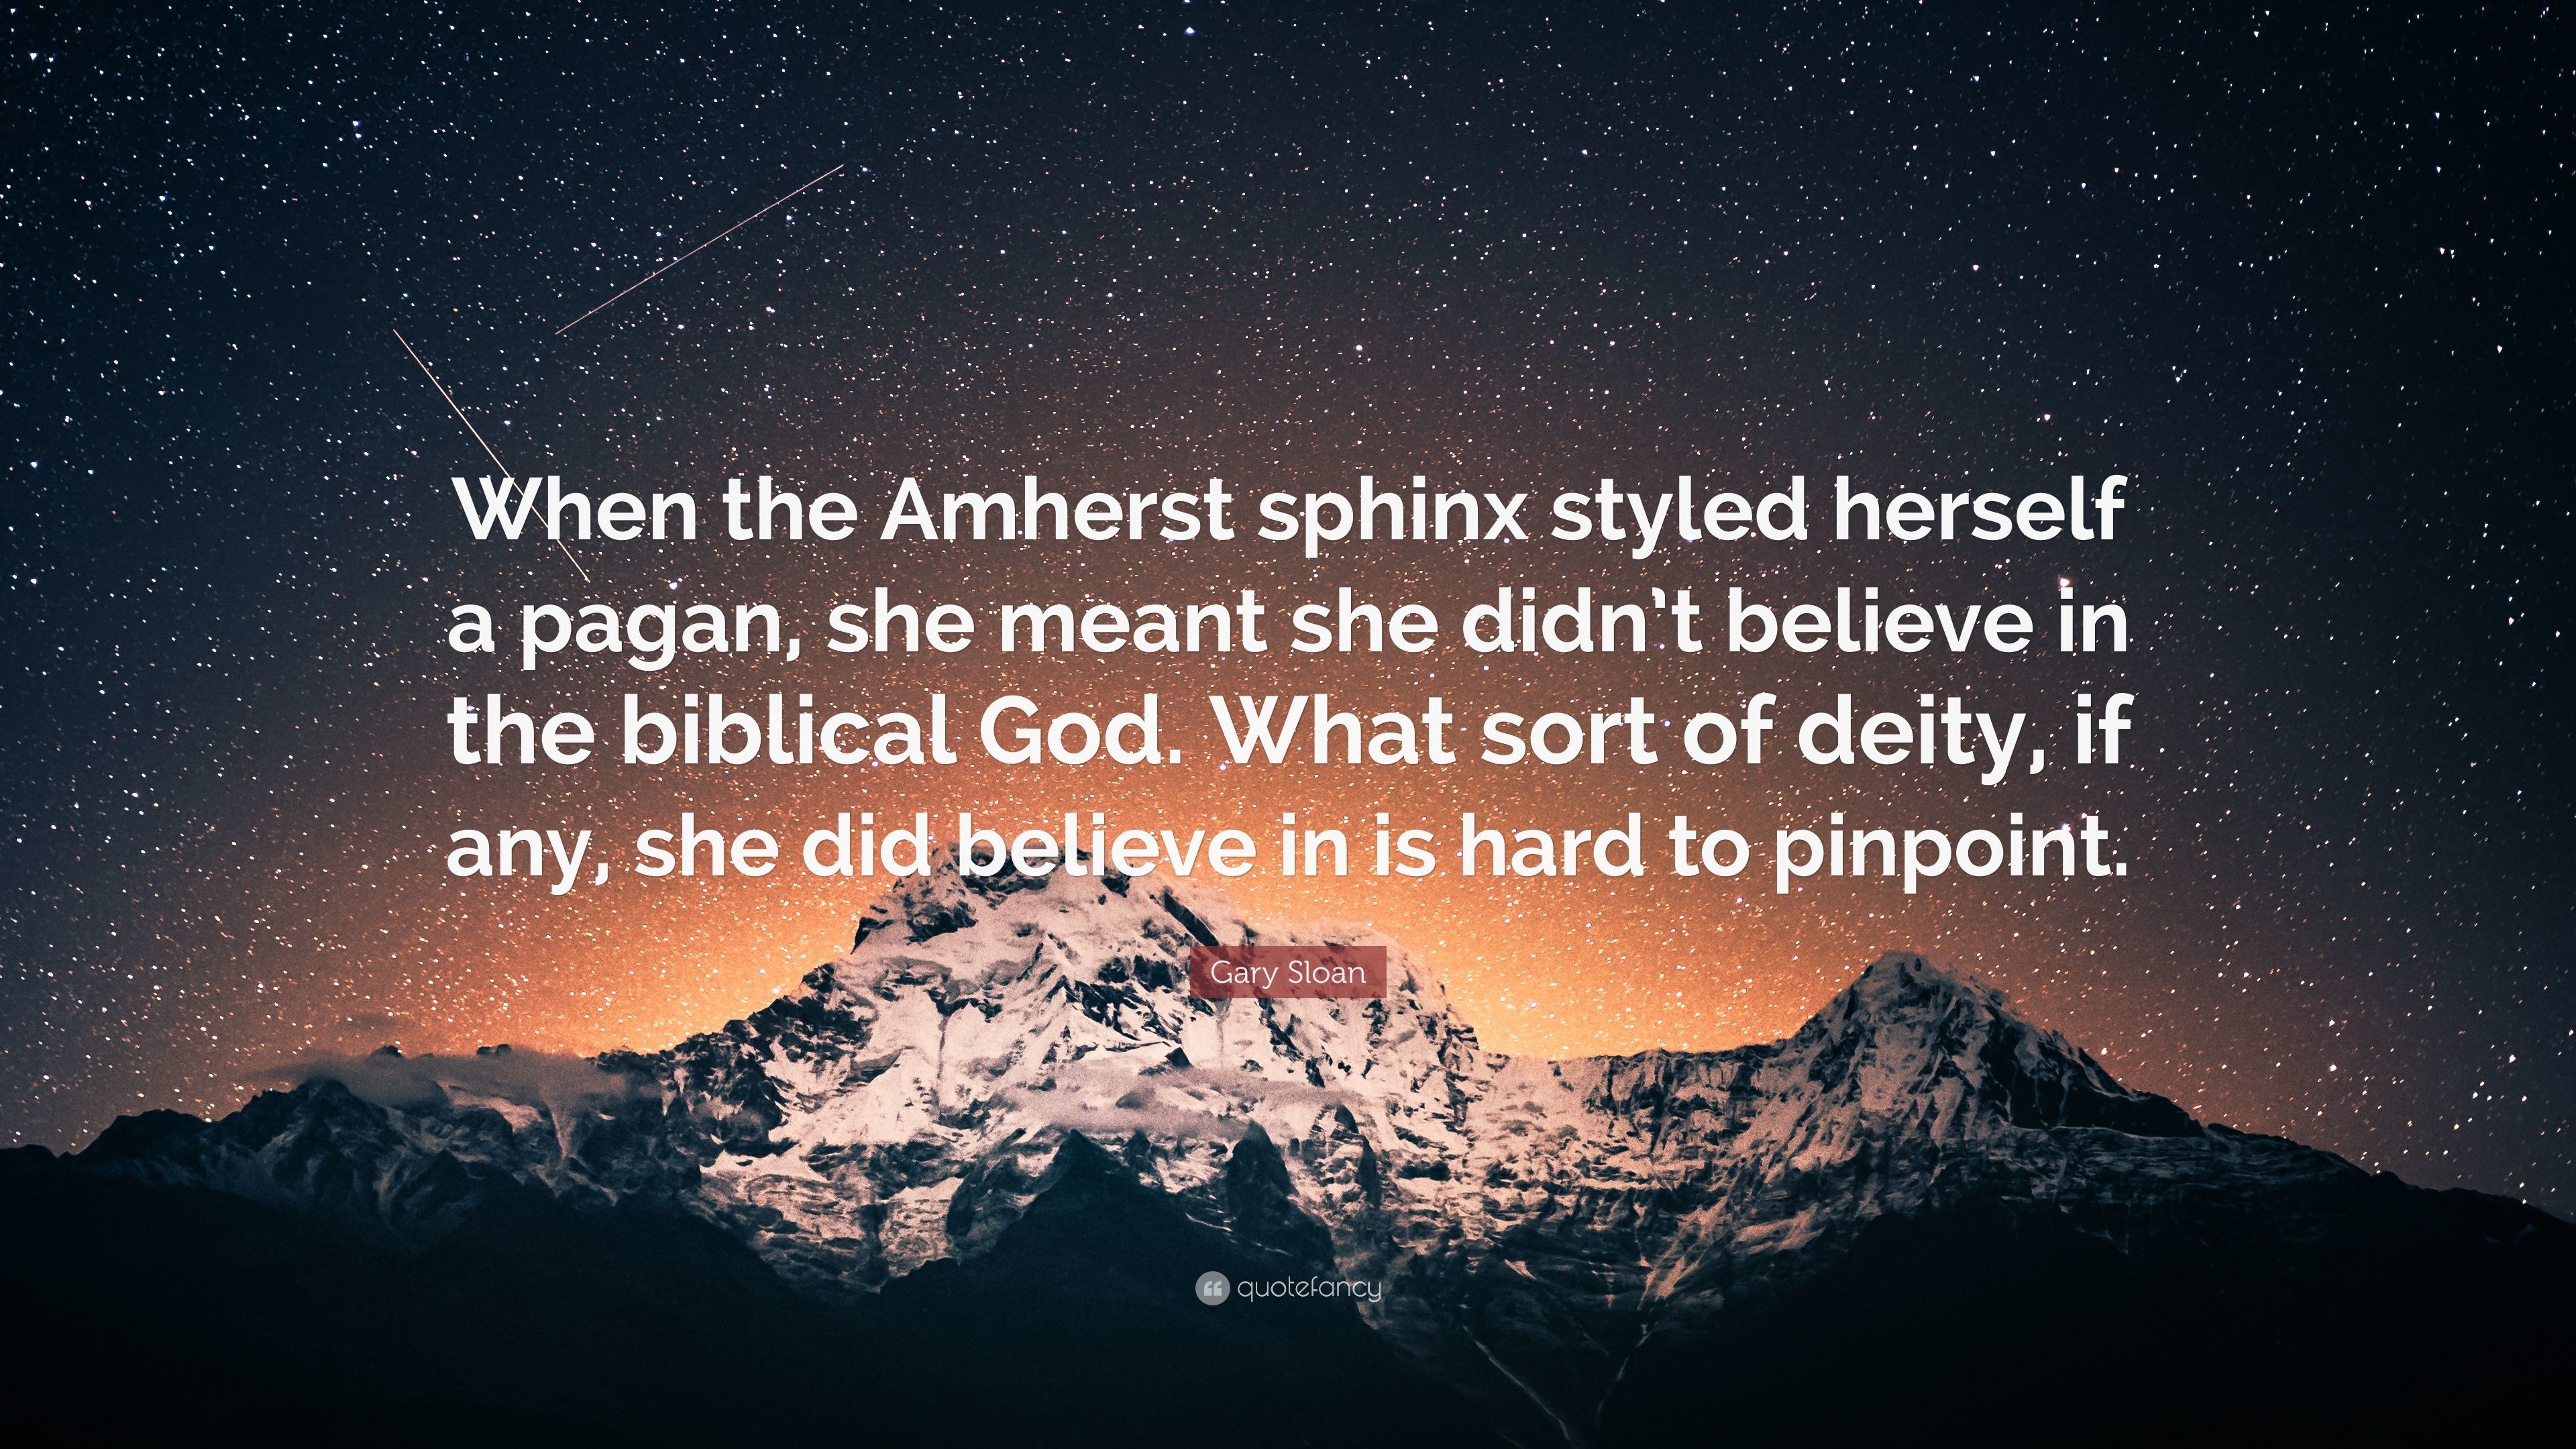 3840x2160 Gary Sloan Quote: “When the Amherst sphinx styled herself a pagan, she meant